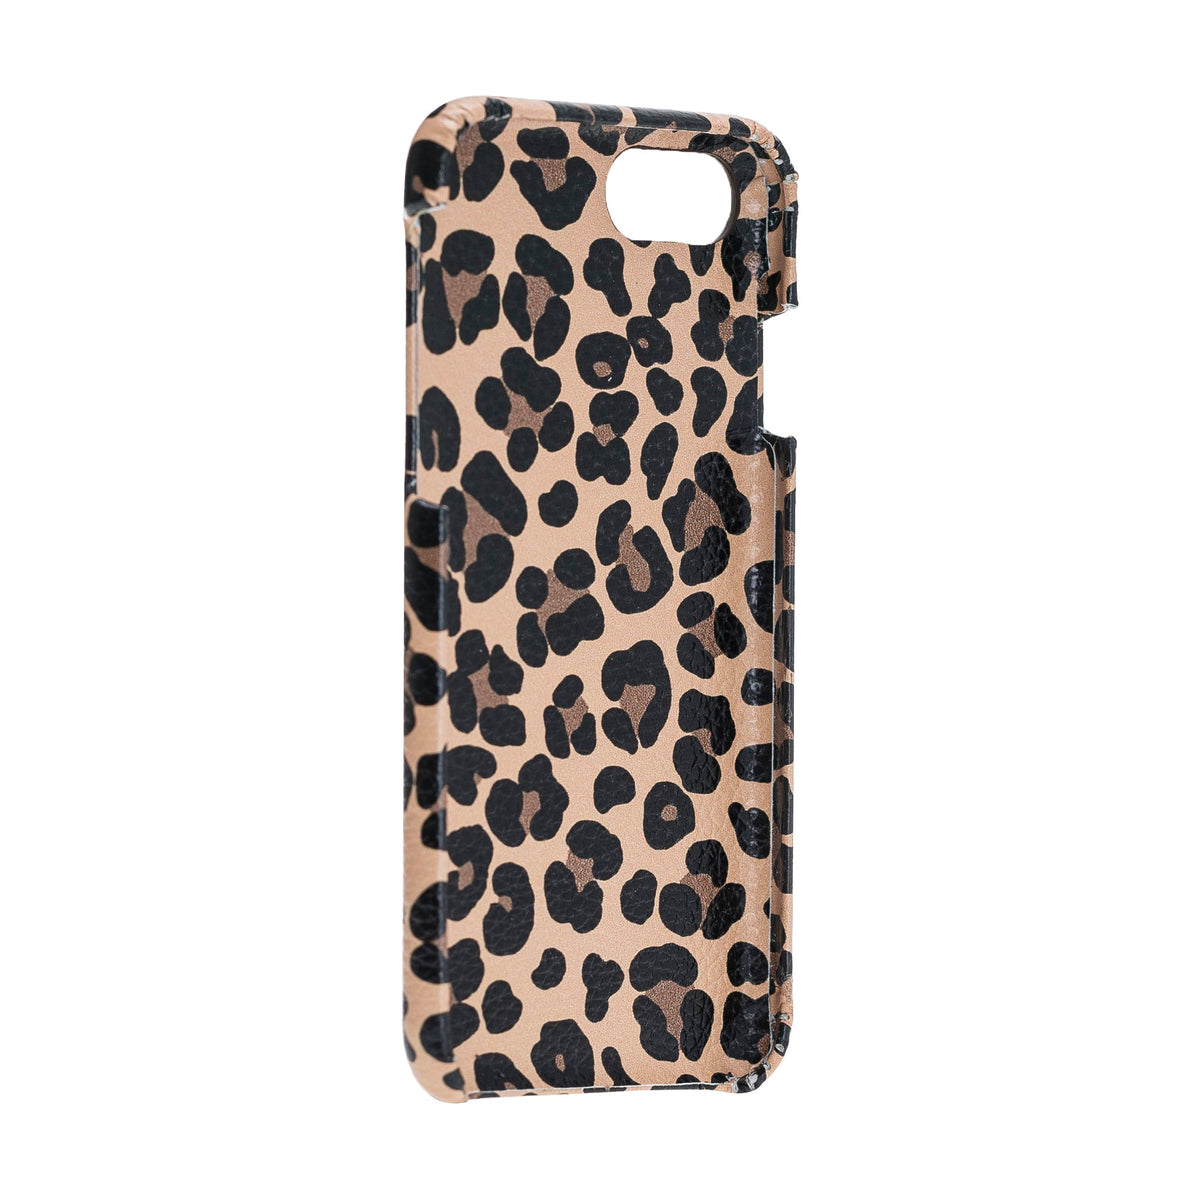 Apple iPhone 7-8 Series Leather Back Cover Leopard